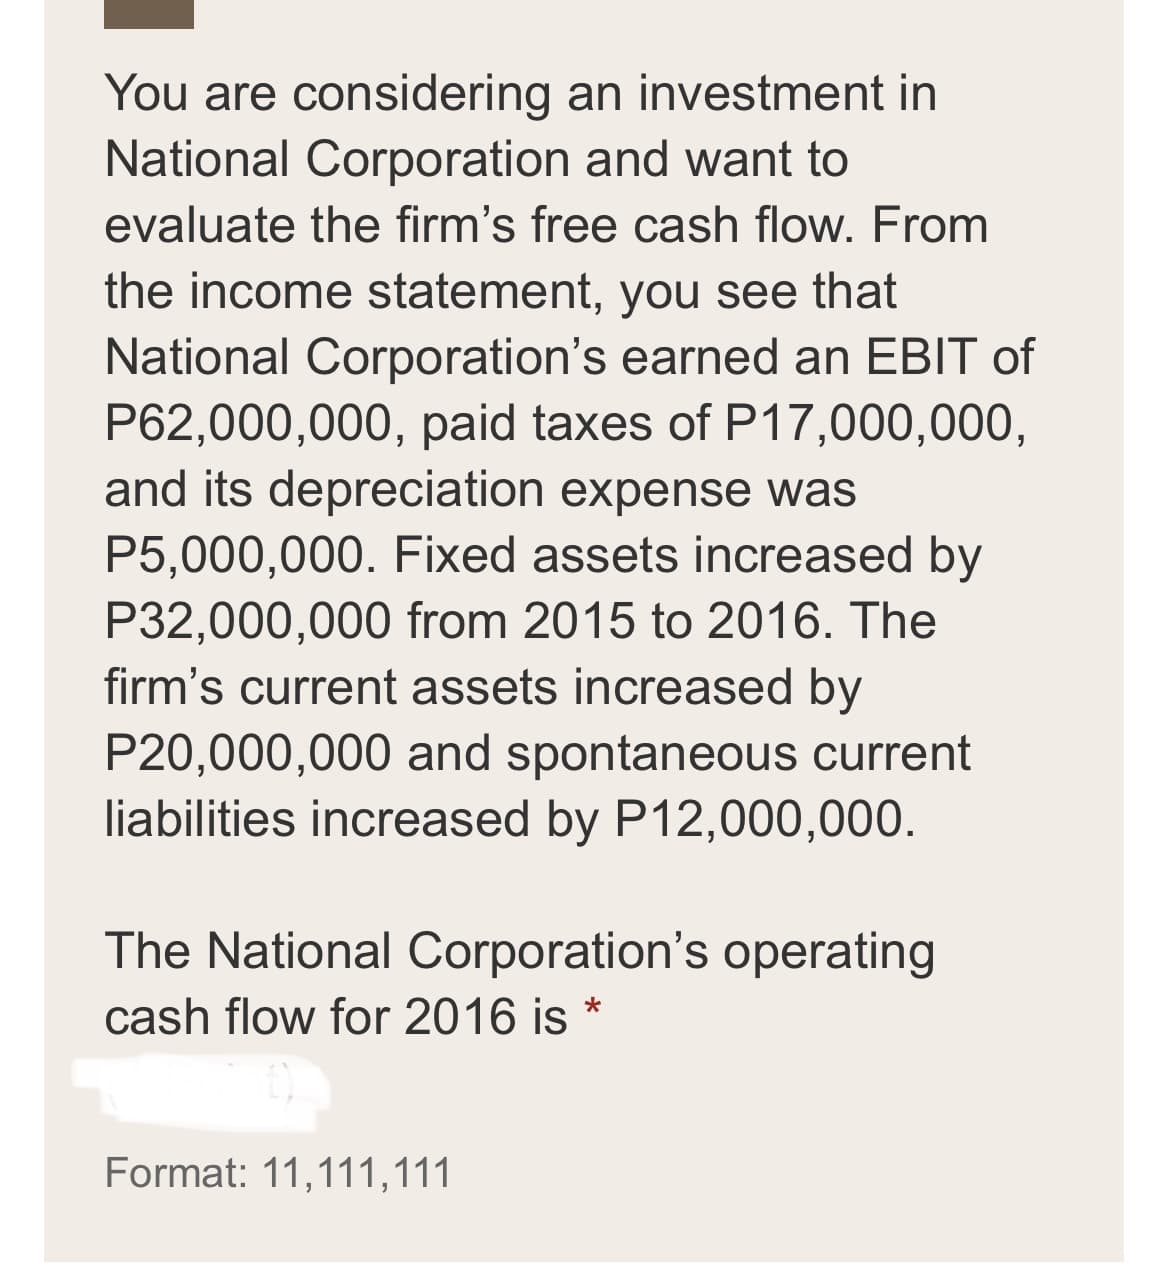 You are considering an investment in
National Corporation and want to
evaluate the firm's free cash flow. From
the income statement, you see that
National Corporation's earned an EBIT of
P62,000,000, paid taxes of P17,000,000,
and its depreciation expense was
P5,000,000. Fixed assets increased by
P32,000,000 from 2015 to 2016. The
firm's current assets increased by
P20,000,000 and spontaneous current
liabilities increased by P12,000,000.
The National Corporation's operating
cash flow for 2016 is *
Format: 11,111,111
